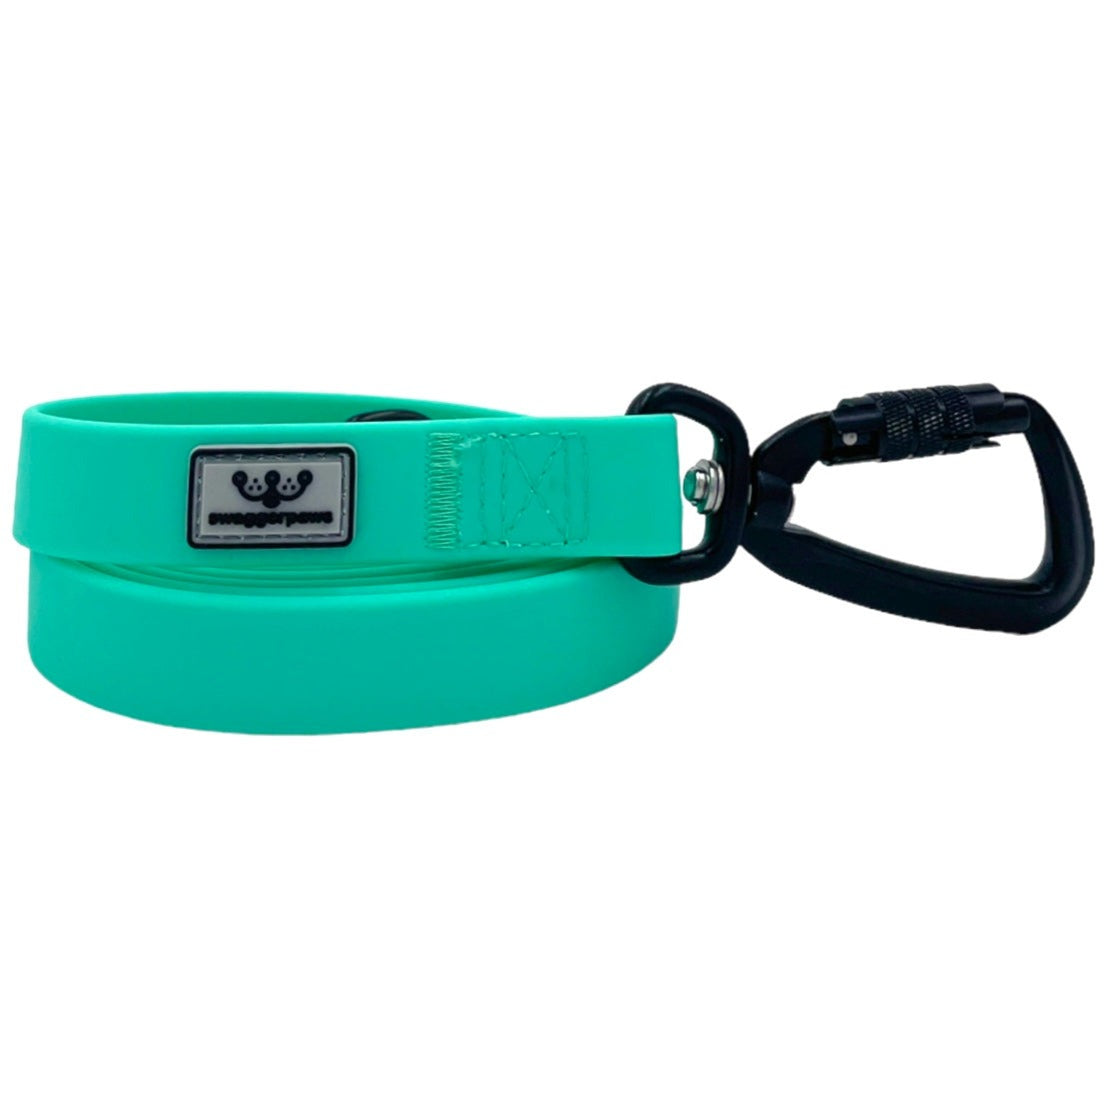 SwaggerPaws waterproof dog lead with auto-lock carabiner, spearmint green